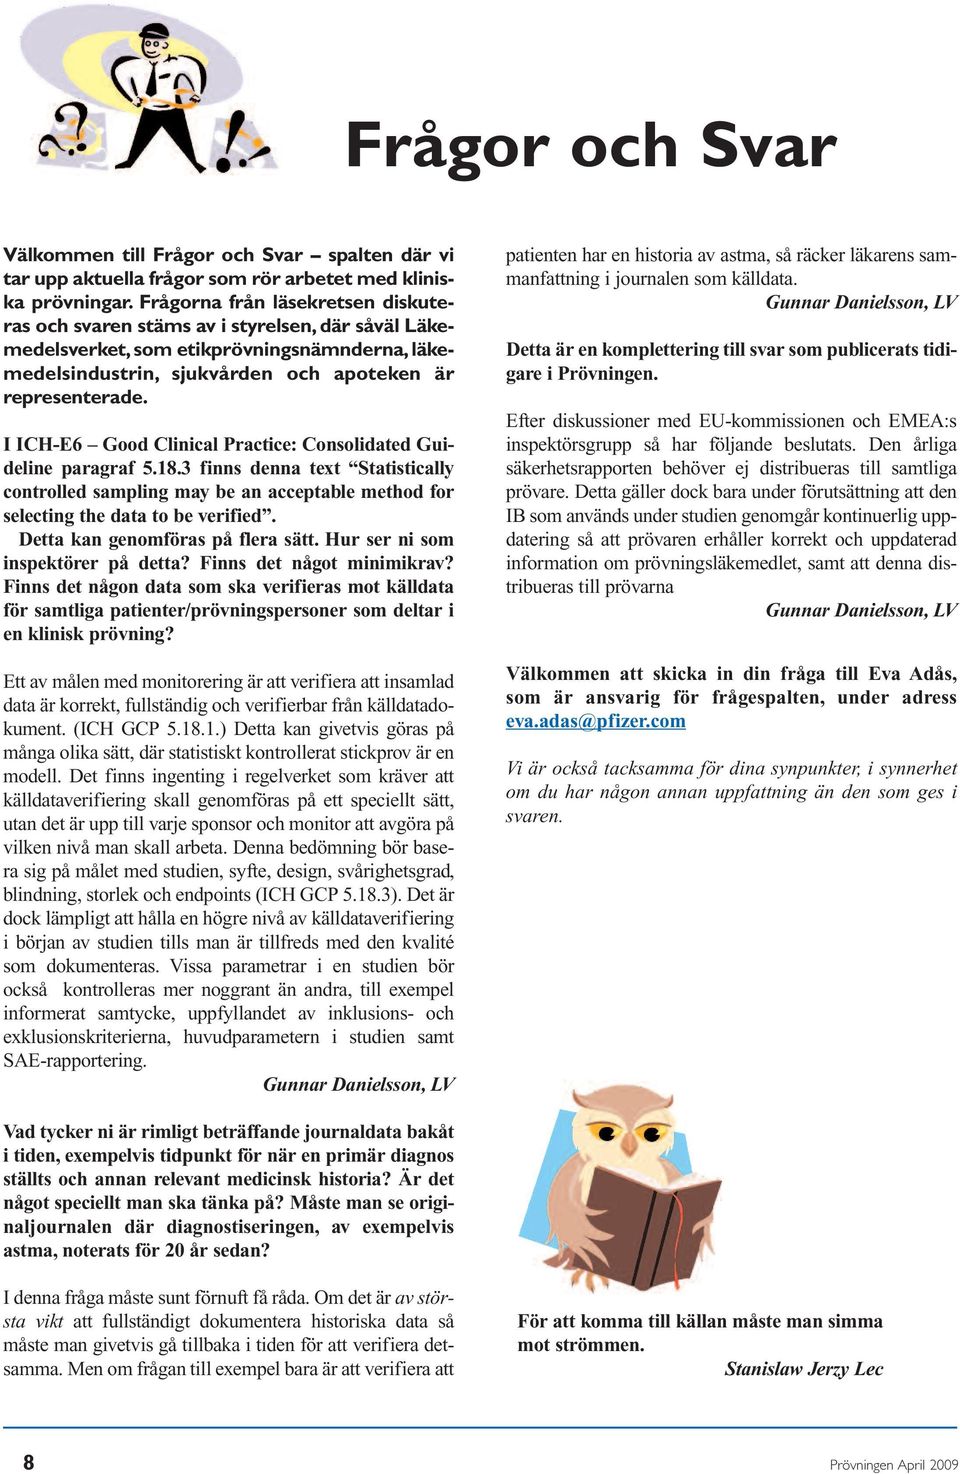 I ICH-E6 Good Clinical Practice: Consolidated Guideline paragraf 5.18.3 finns denna text Statistically controlled sampling may be an acceptable method for selecting the data to be verified.